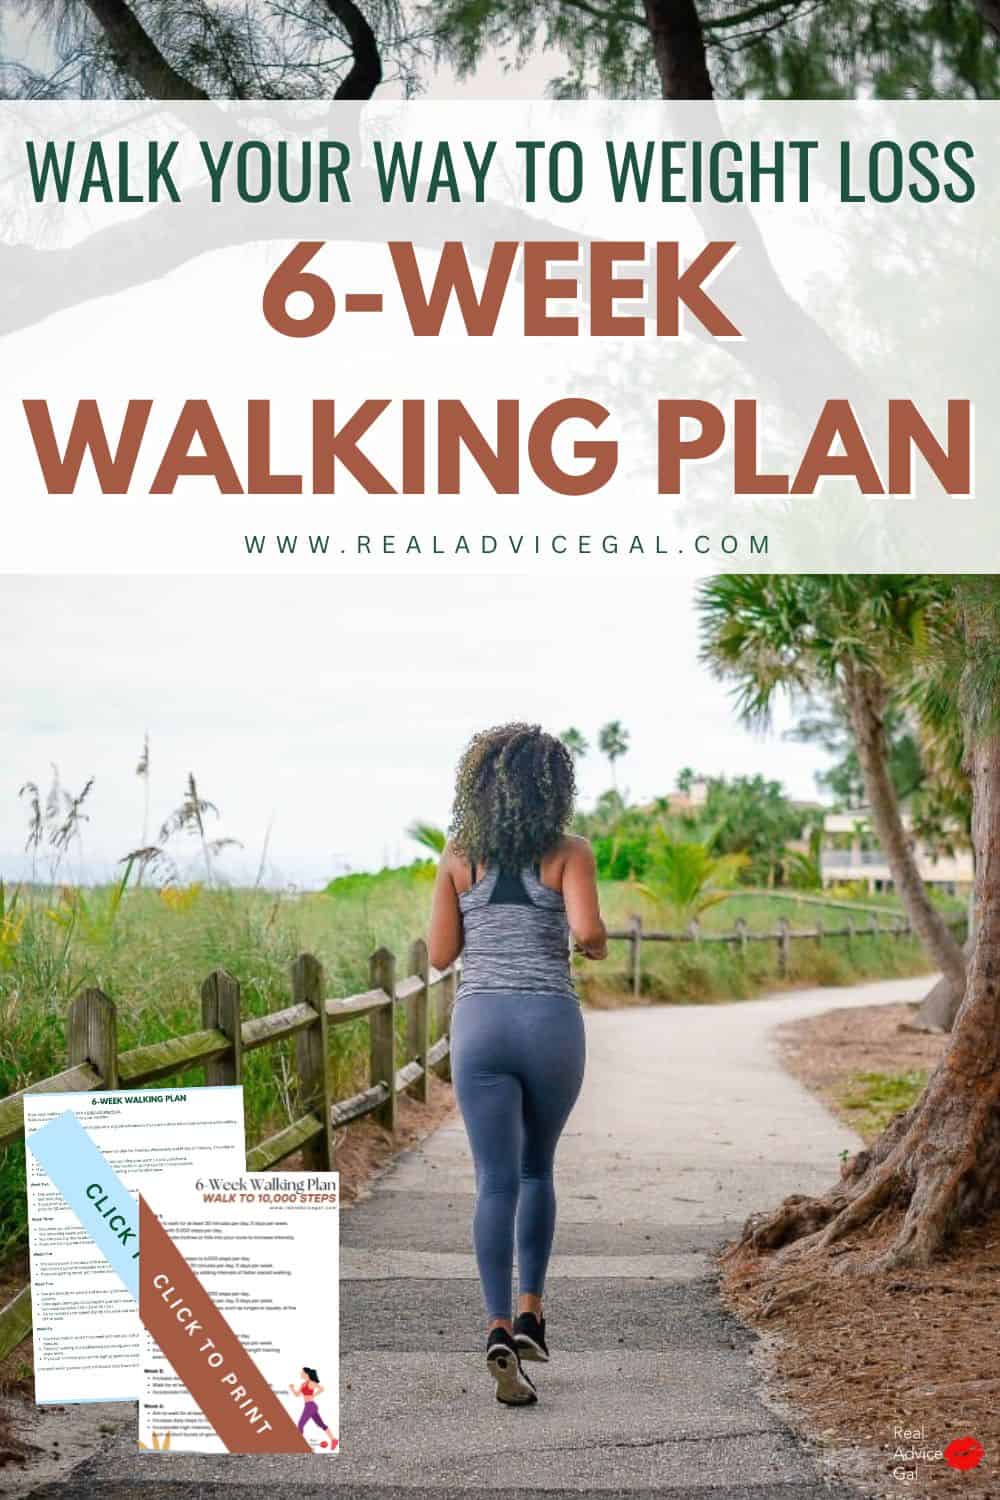 Walk your way to weight loss. Get our free printable 6-week walking plans